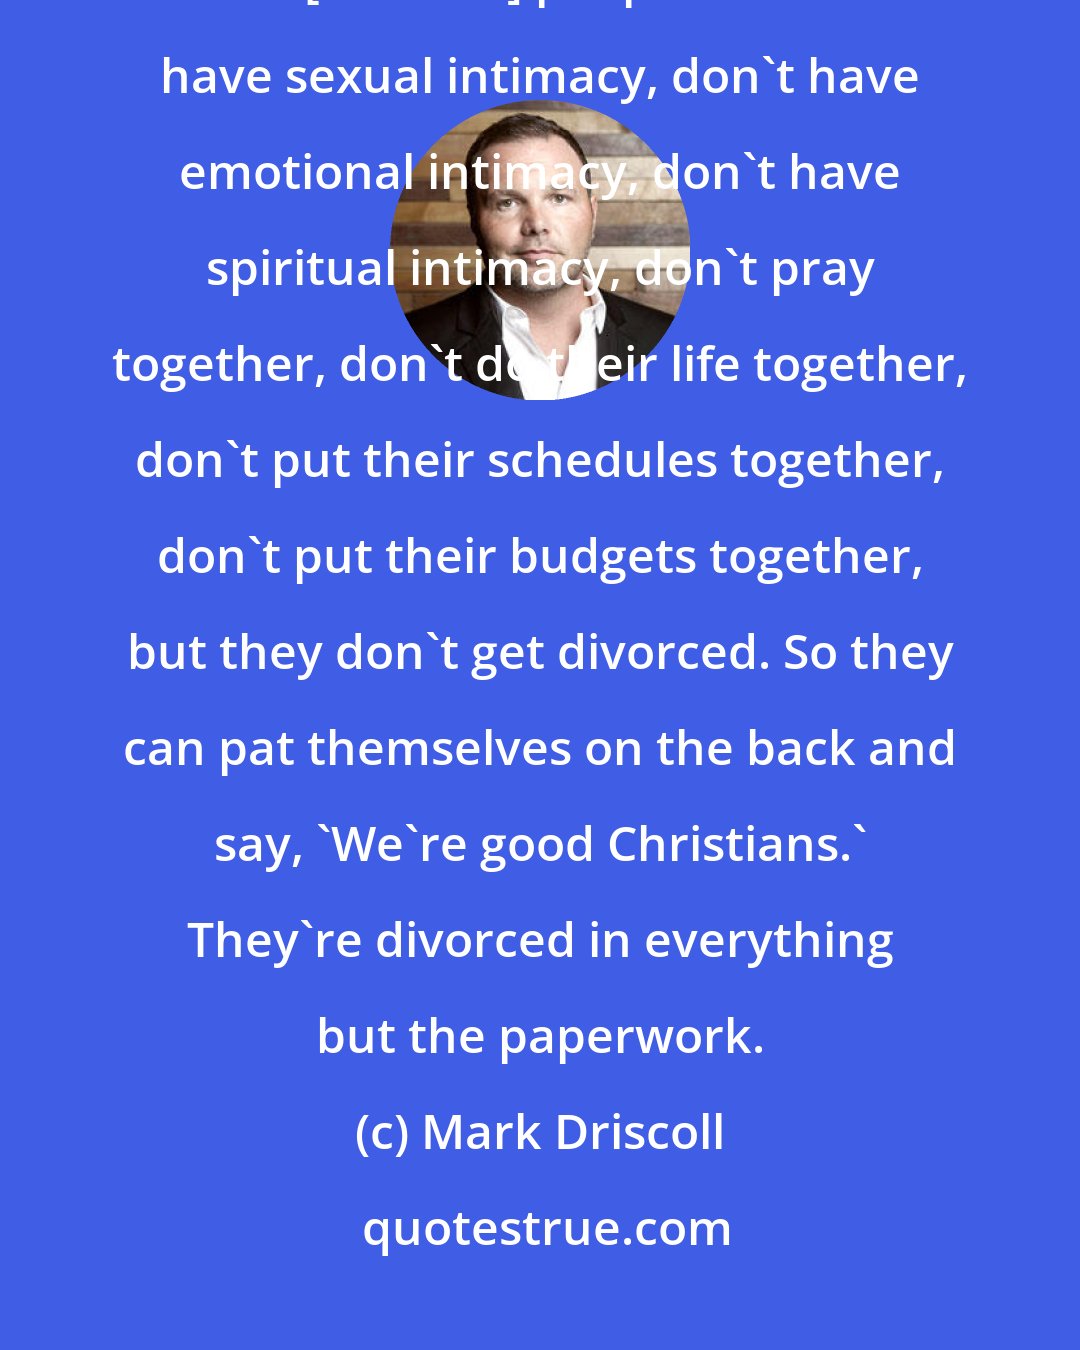 Mark Driscoll: You know what I find amazing is within Christianity it is not uncommon to find [married] people who don't have sexual intimacy, don't have emotional intimacy, don't have spiritual intimacy, don't pray together, don't do their life together, don't put their schedules together, don't put their budgets together, but they don't get divorced. So they can pat themselves on the back and say, 'We're good Christians.' They're divorced in everything but the paperwork.